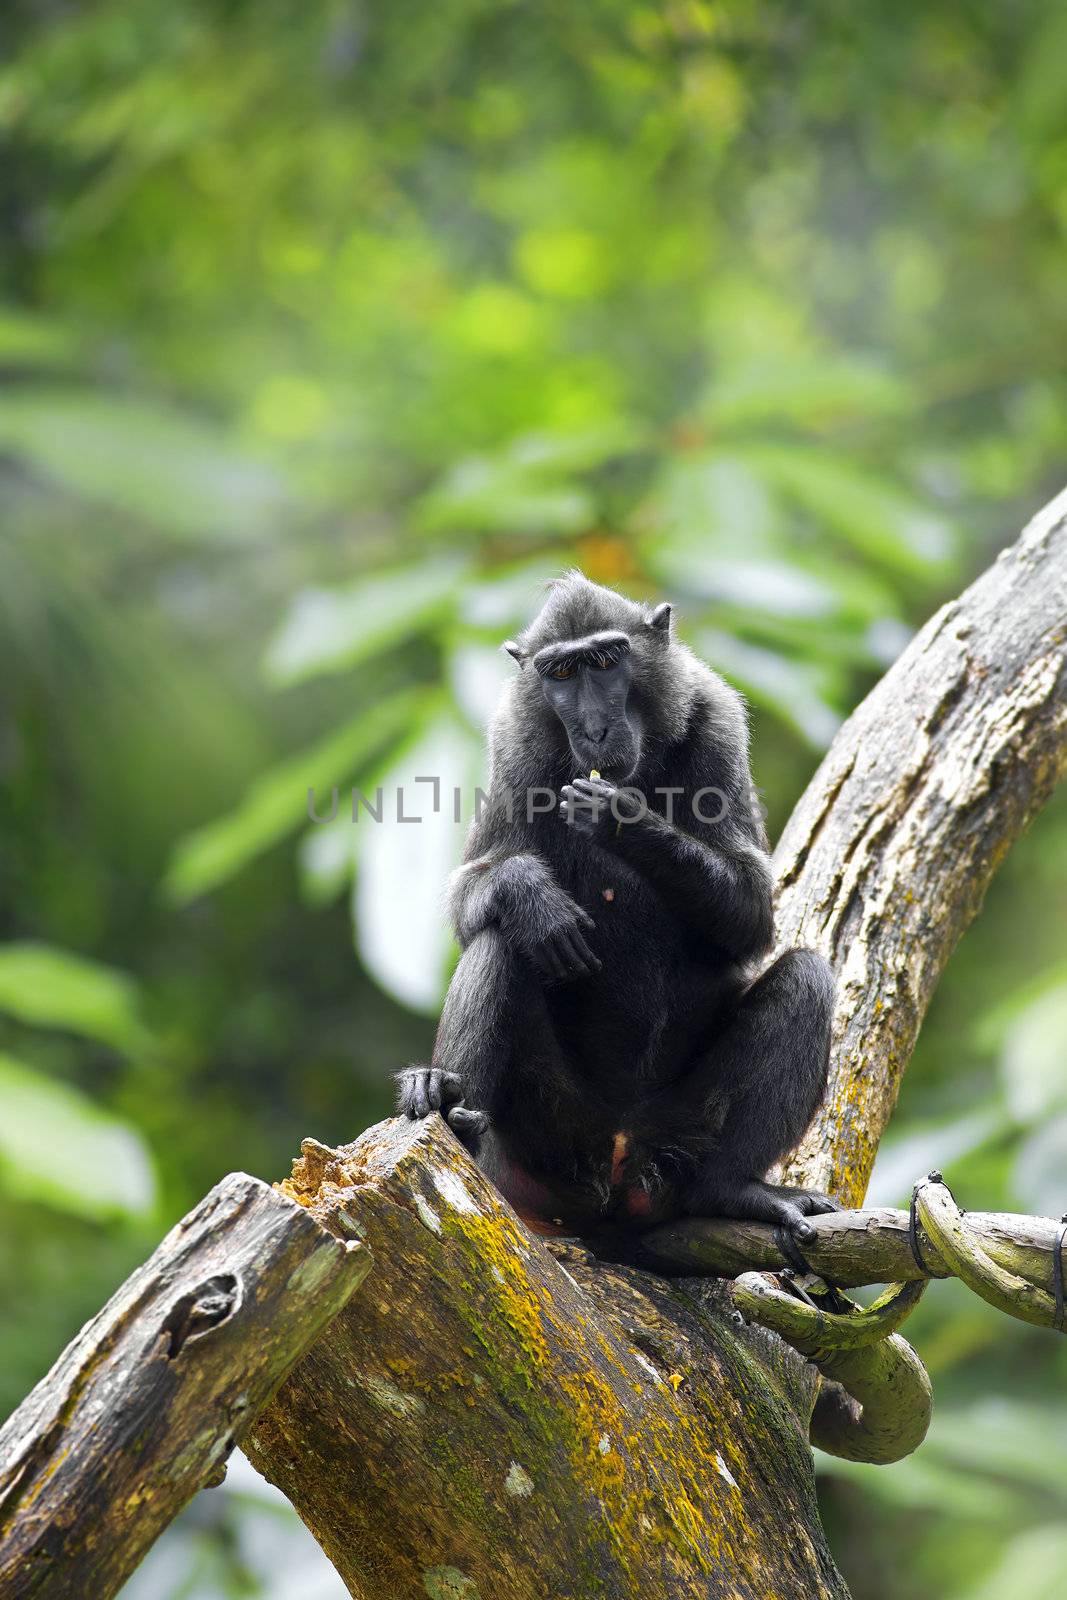 Crested Black Macaque by kjorgen